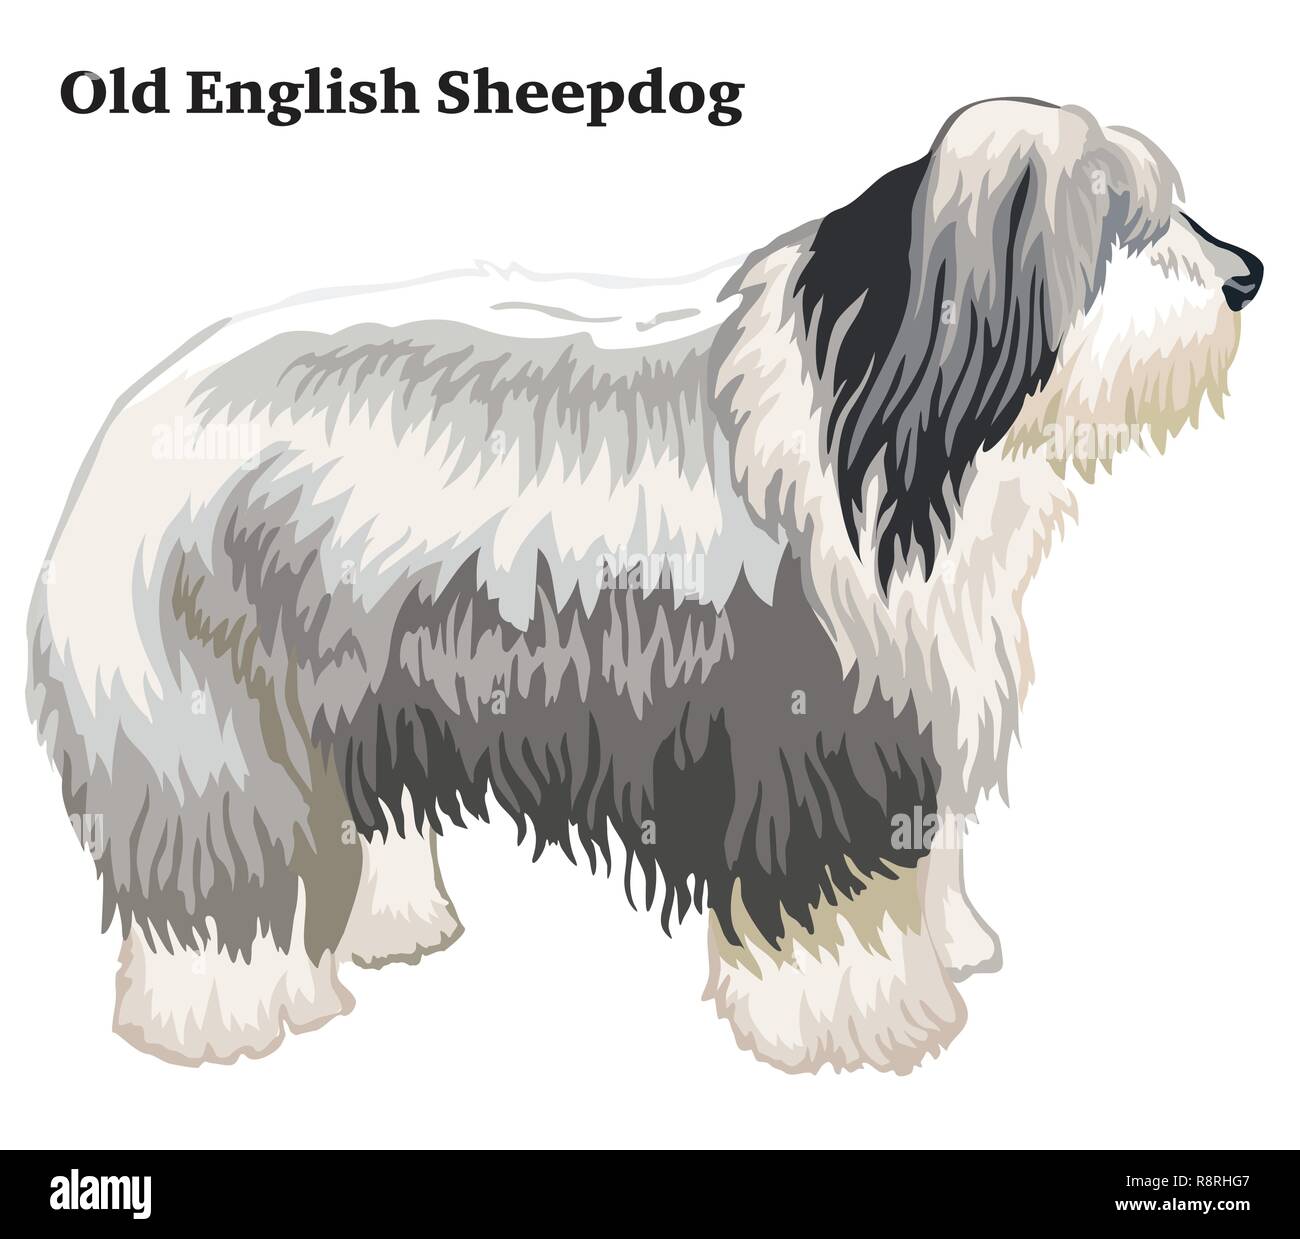 Pastor ovejero ingles (Tomas)  Old english sheepdog puppy, Old